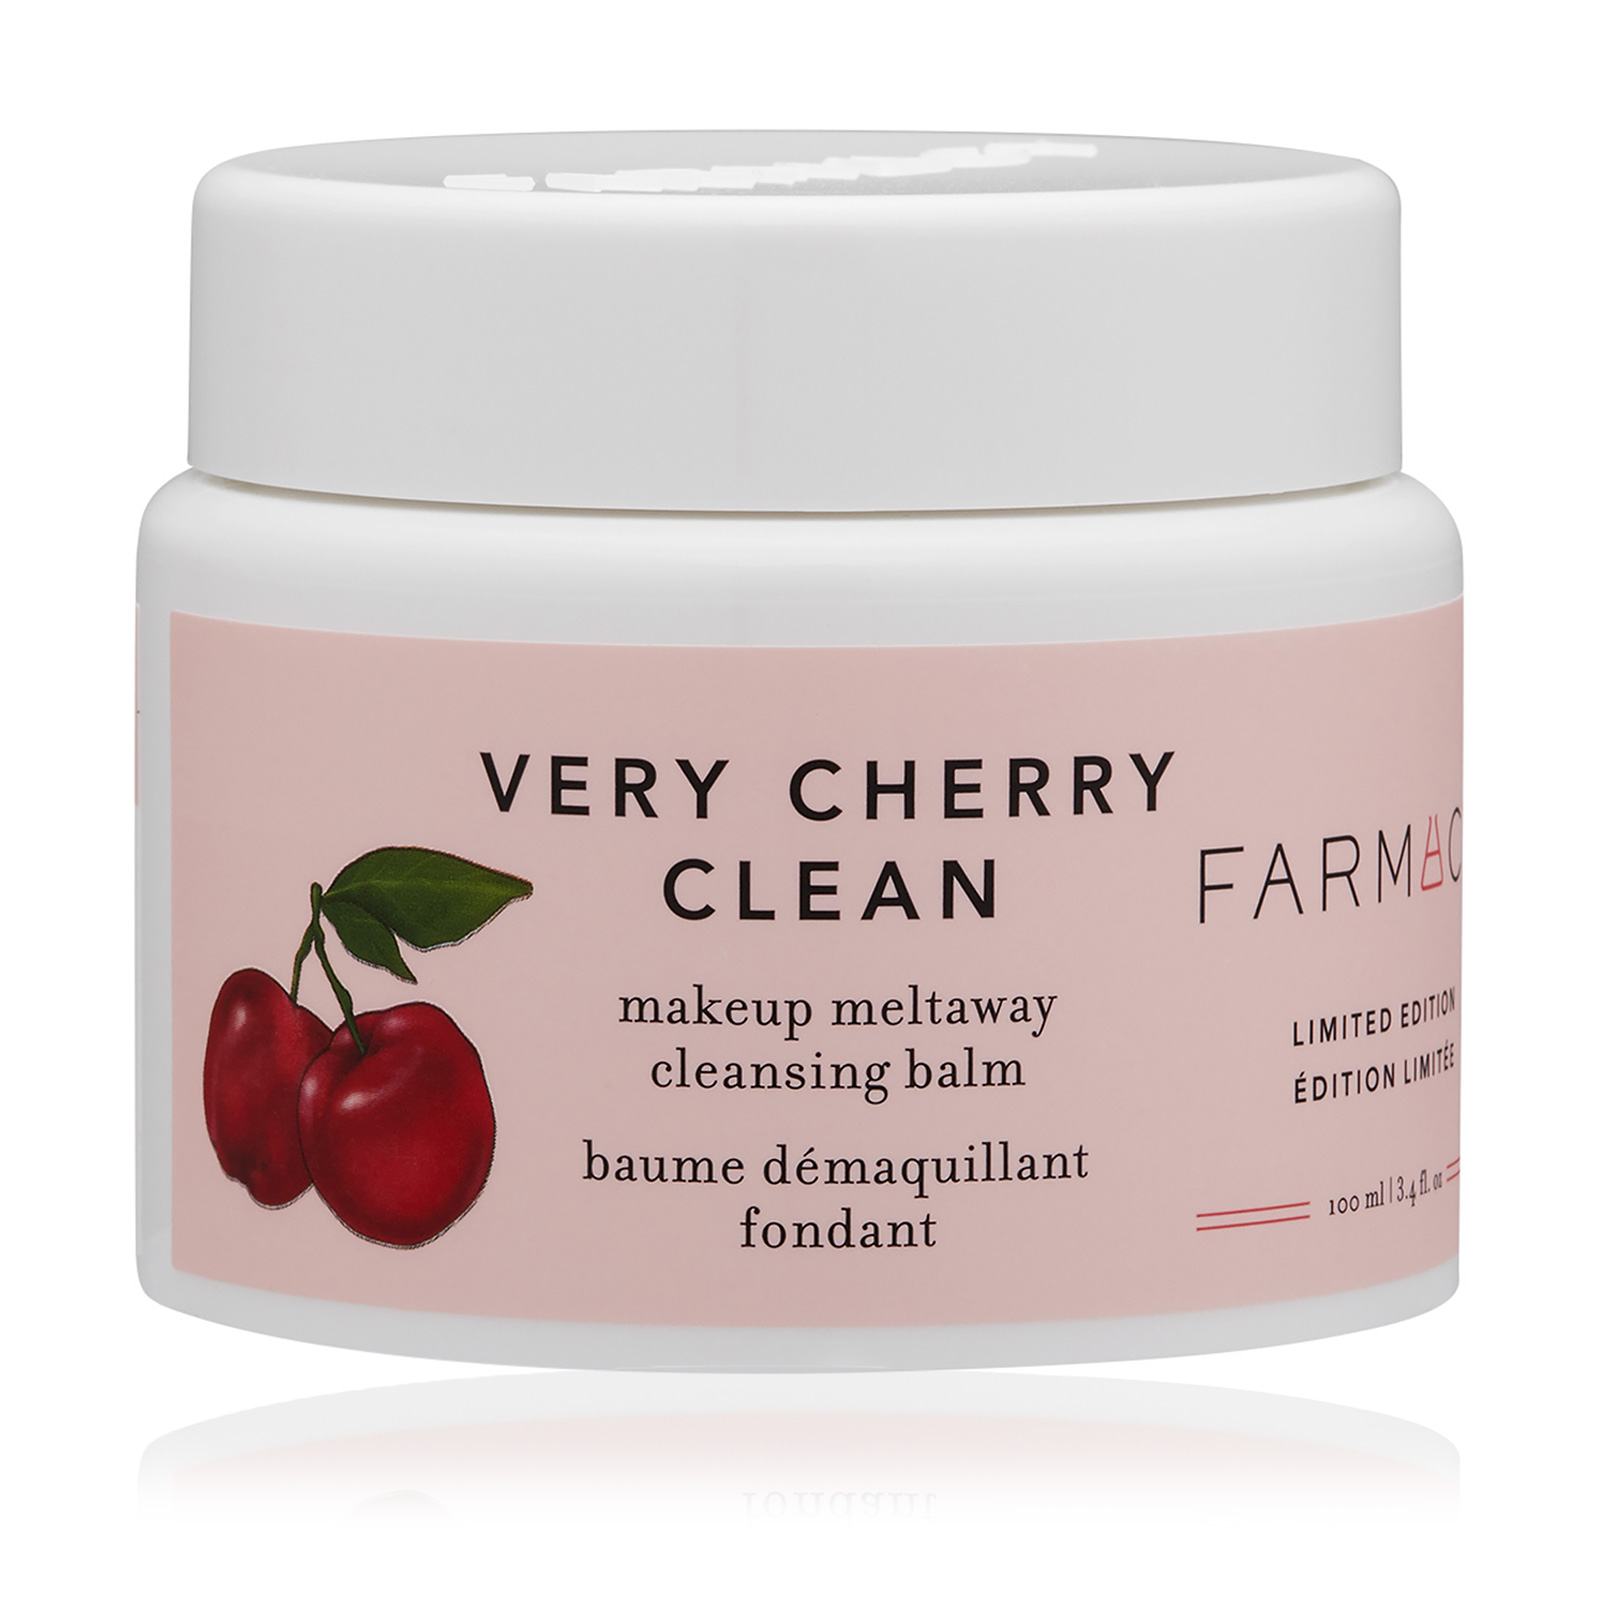 Very Cherry Clean Makeup Meltaway Cleansing Balm